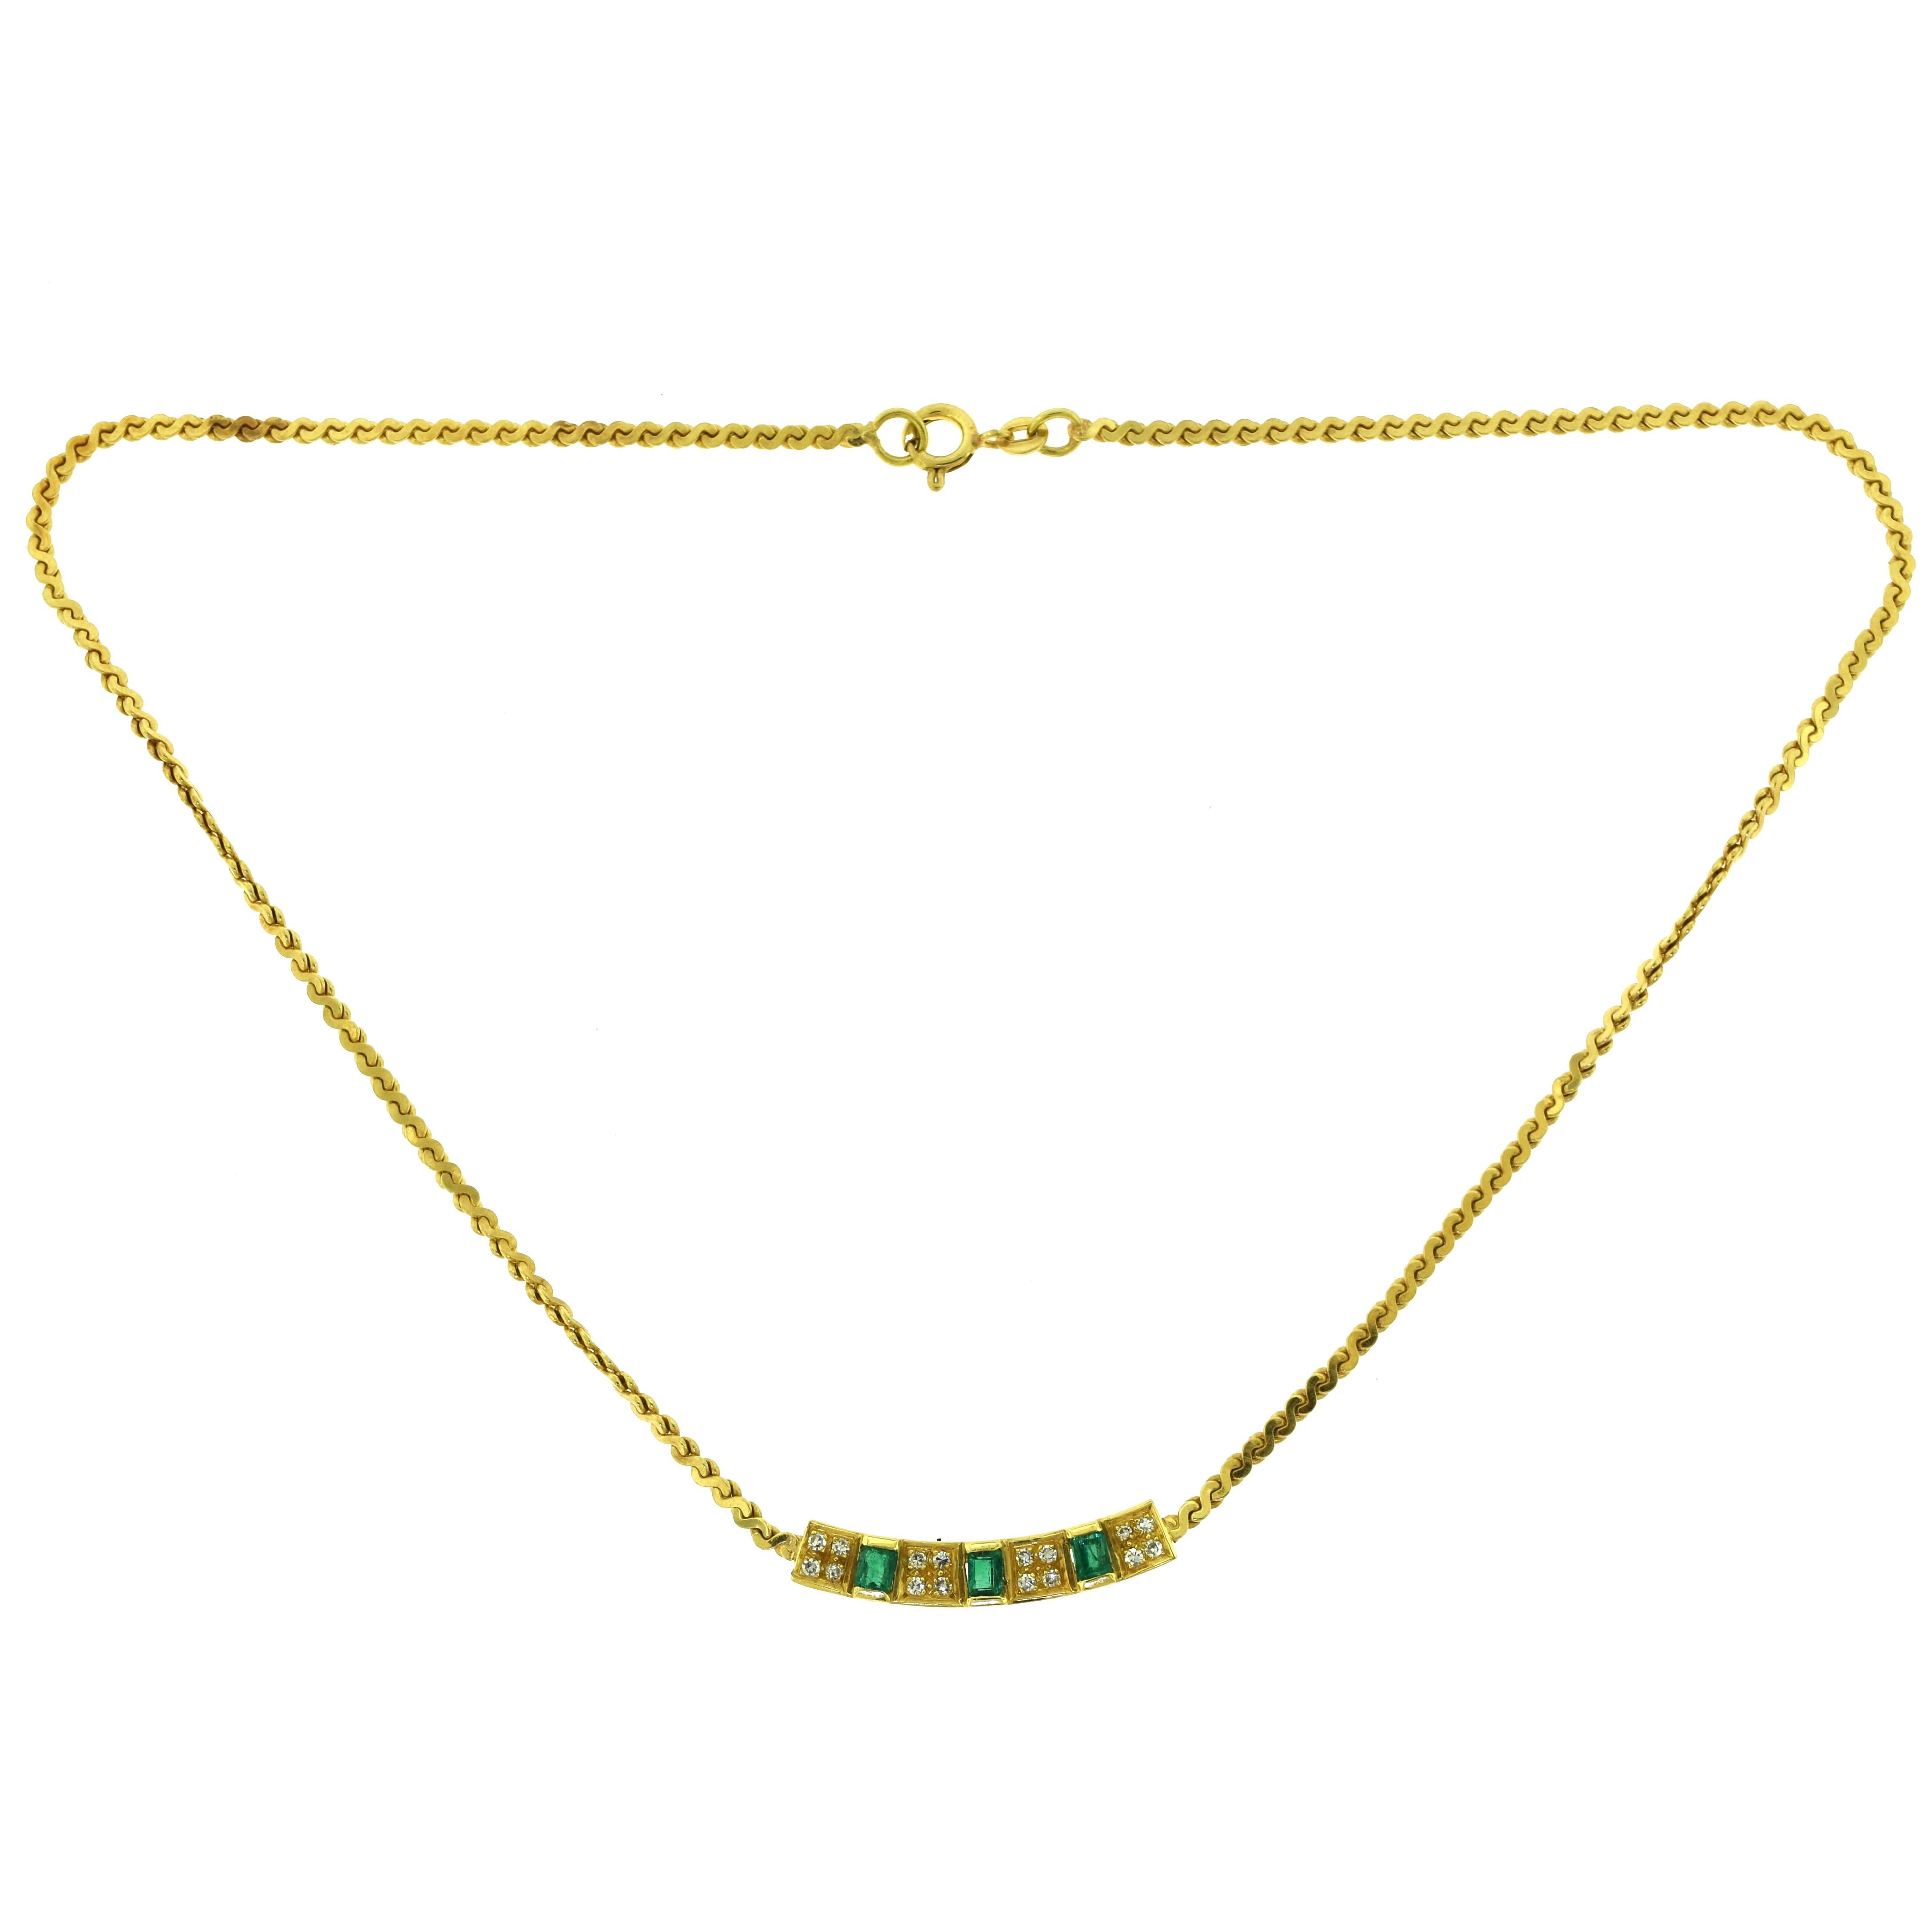 Diamond and Baguette Cut Emerald Bar Yellow Gold Necklace In Good Condition For Sale In Miami, FL